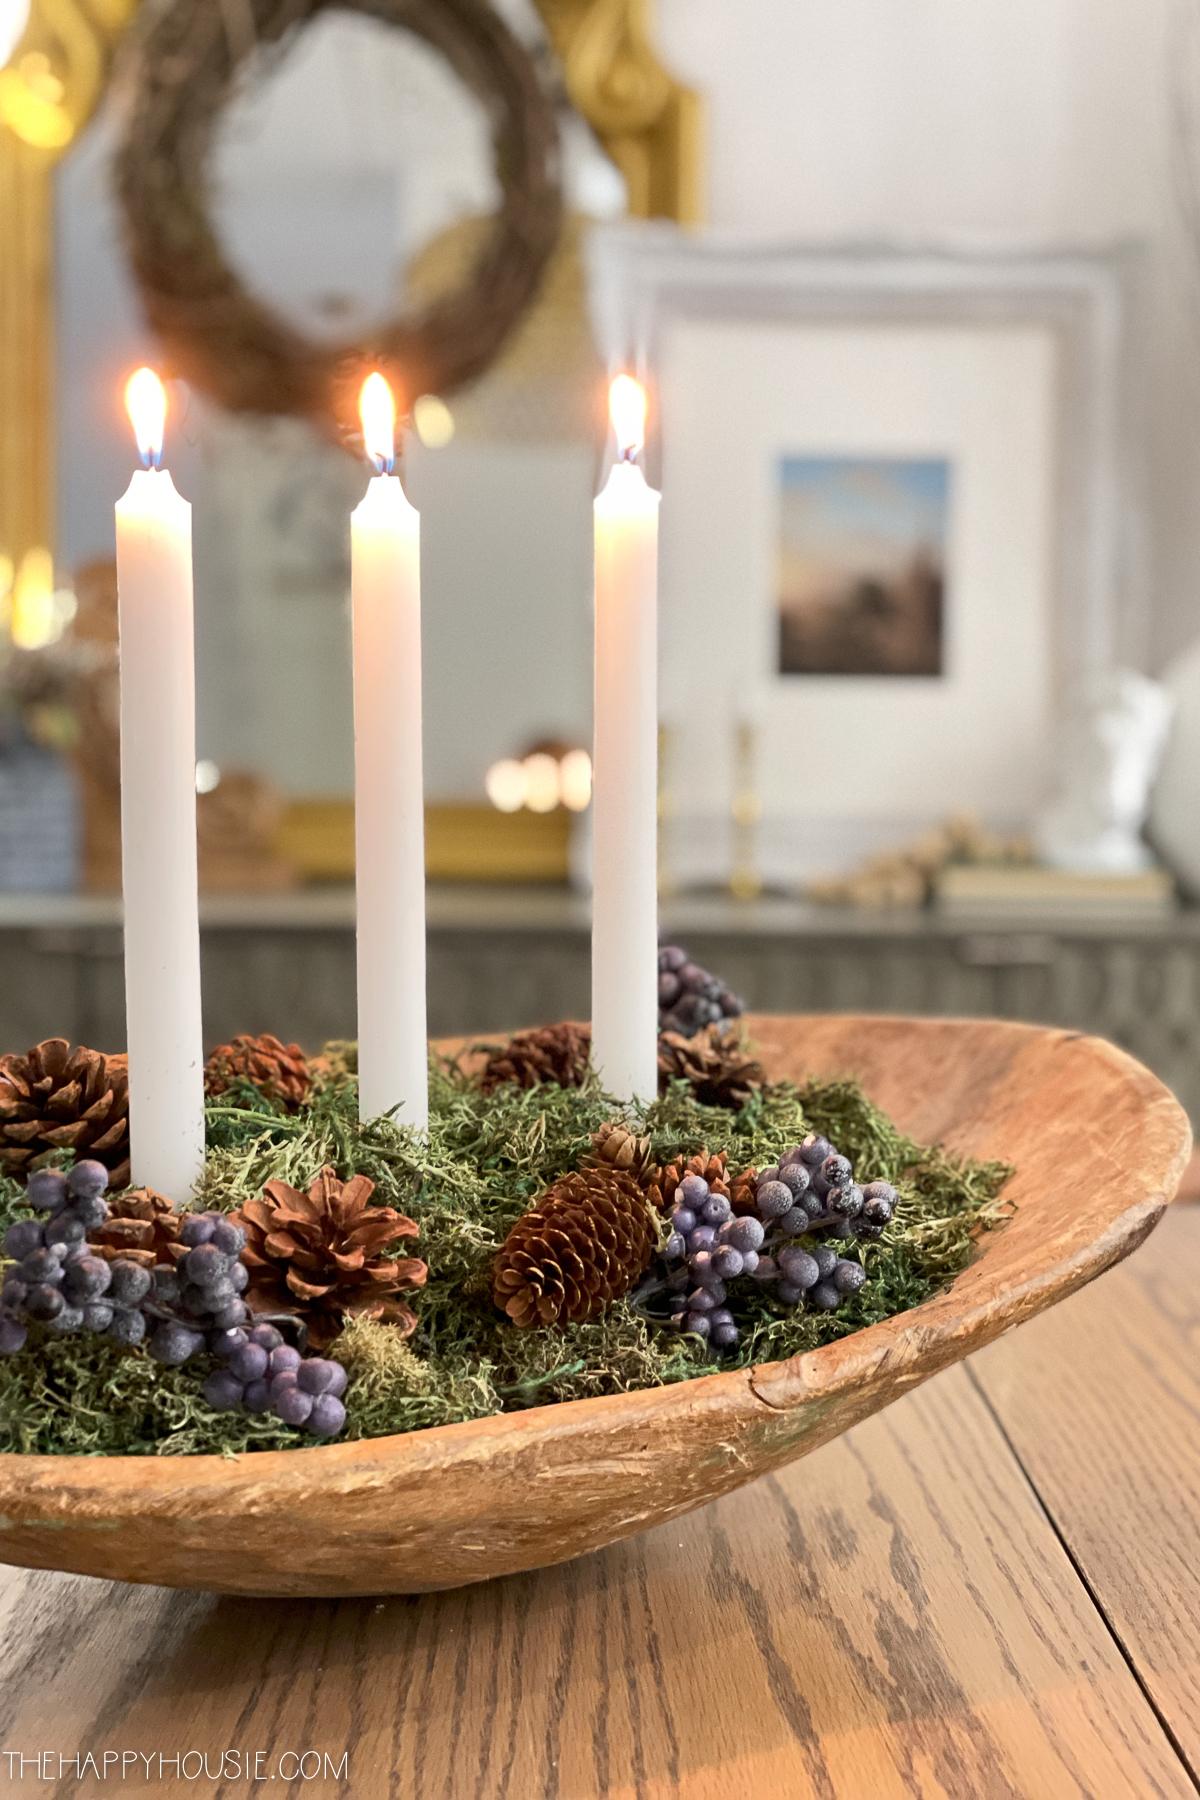 A dough bowl with moss, pine cones and candles in it.